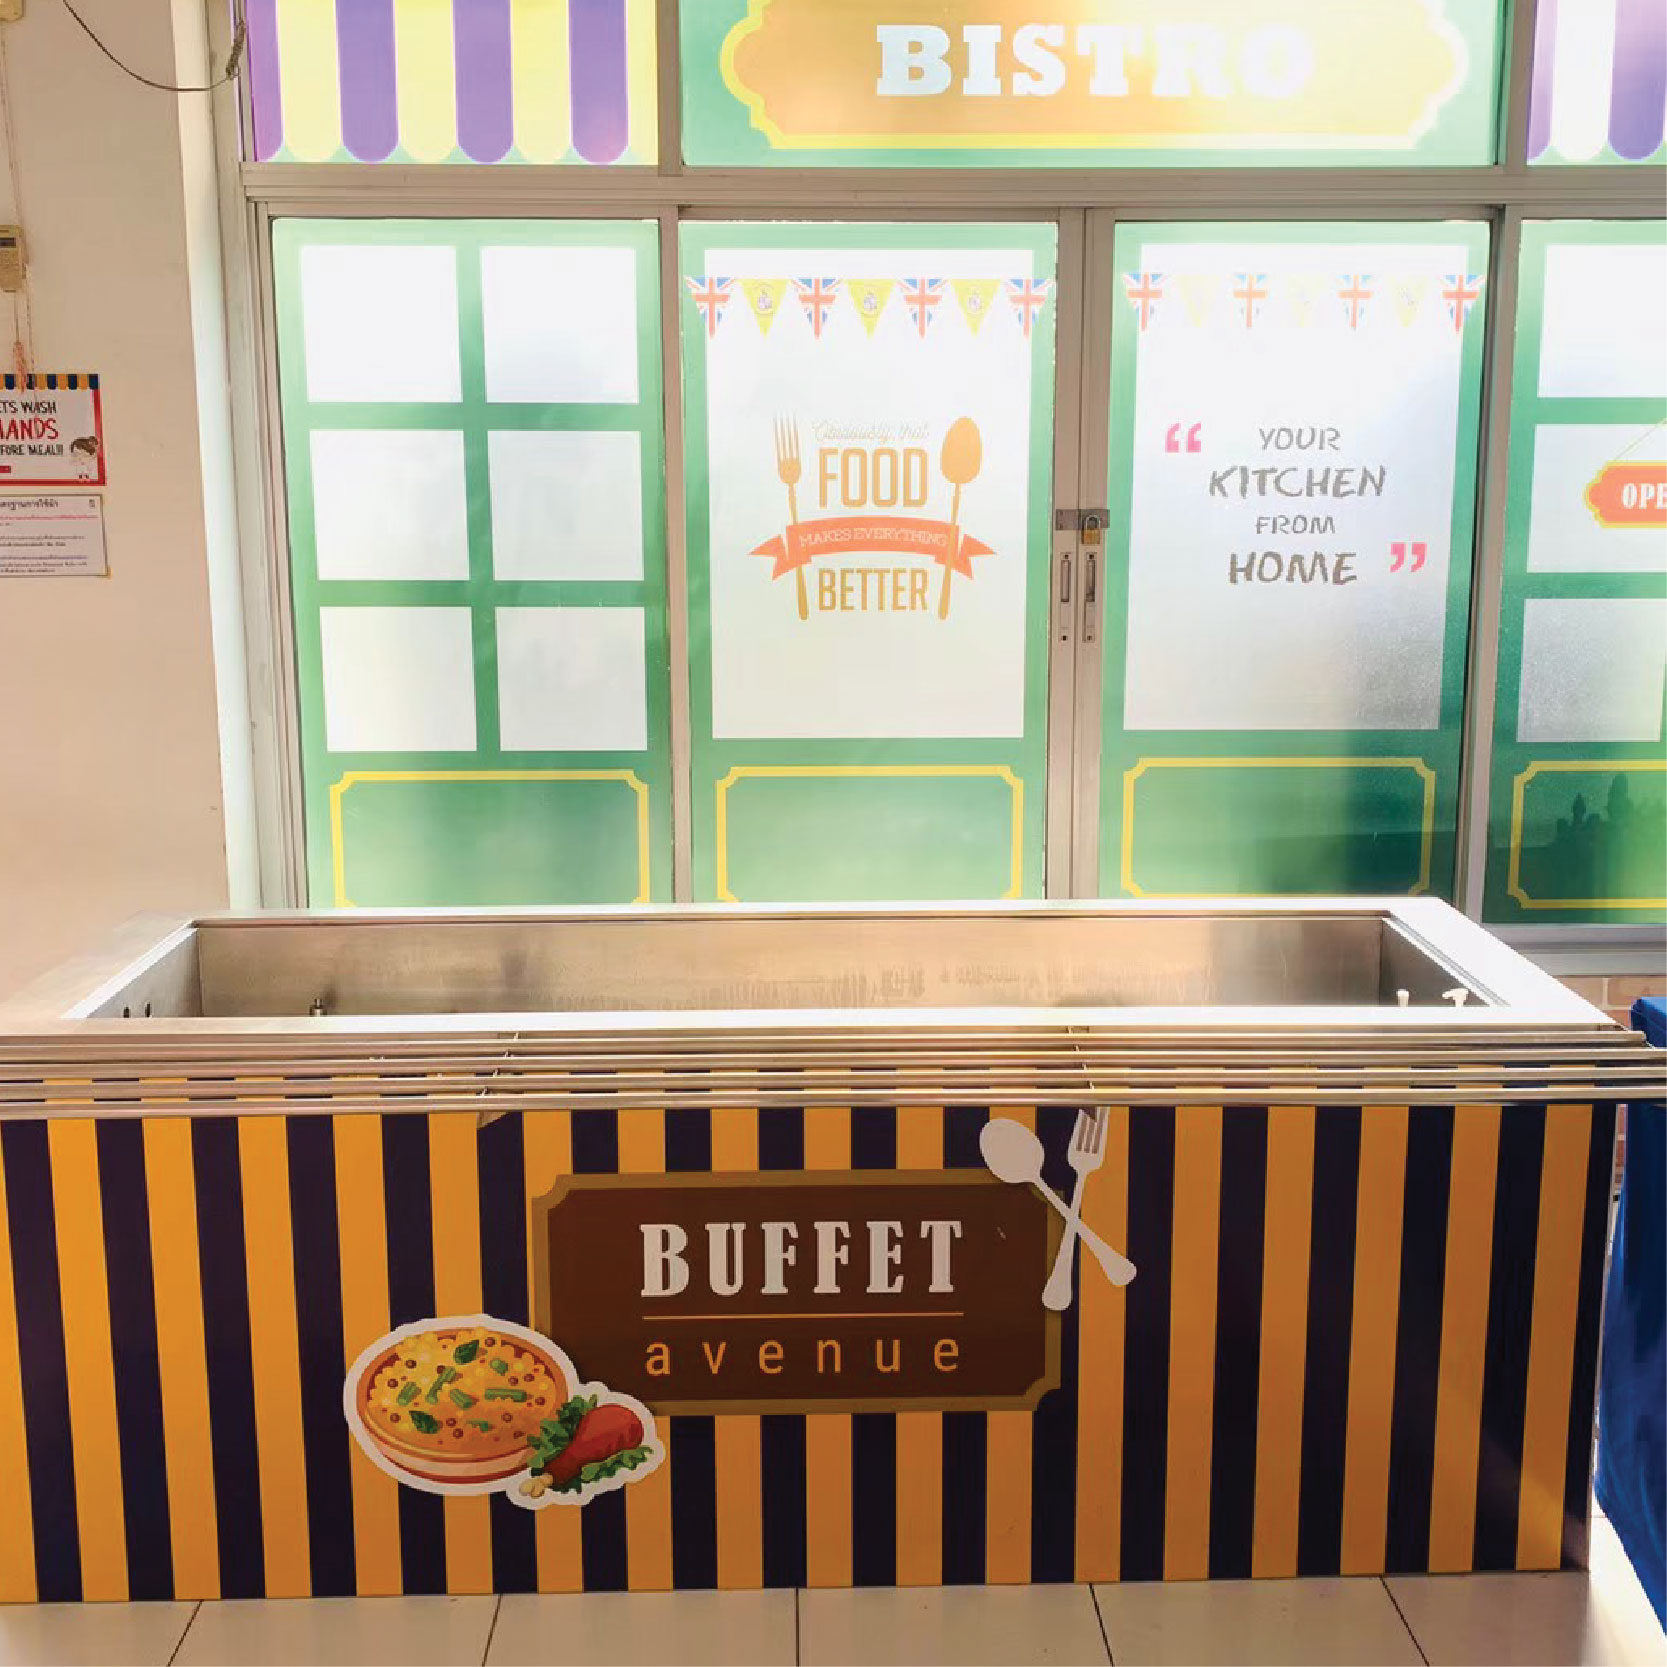 a clean buffet avenue food stall at a canteen as one of foodhouse catering services- foodhouse